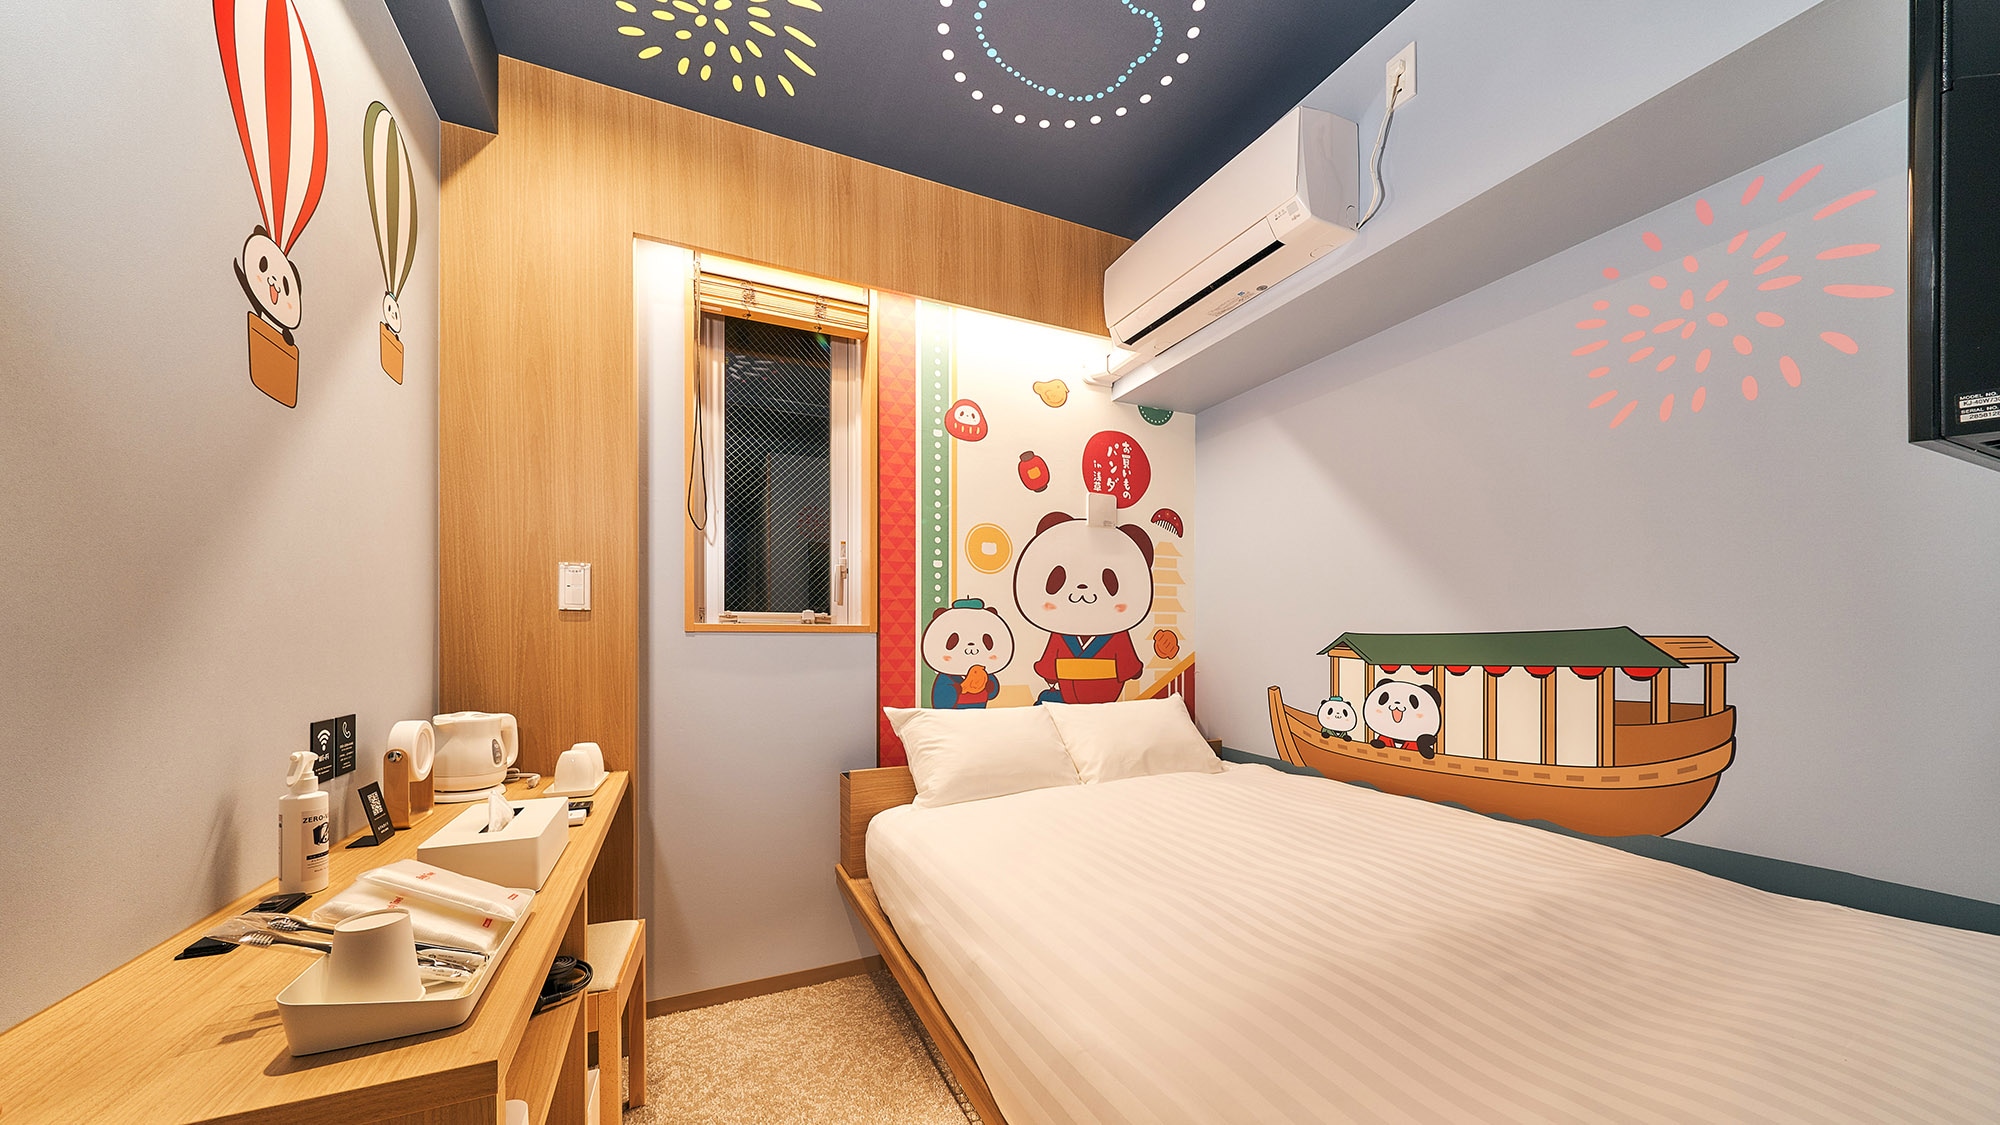 [Shopping panda room / double] The double room is designed by Sumida River